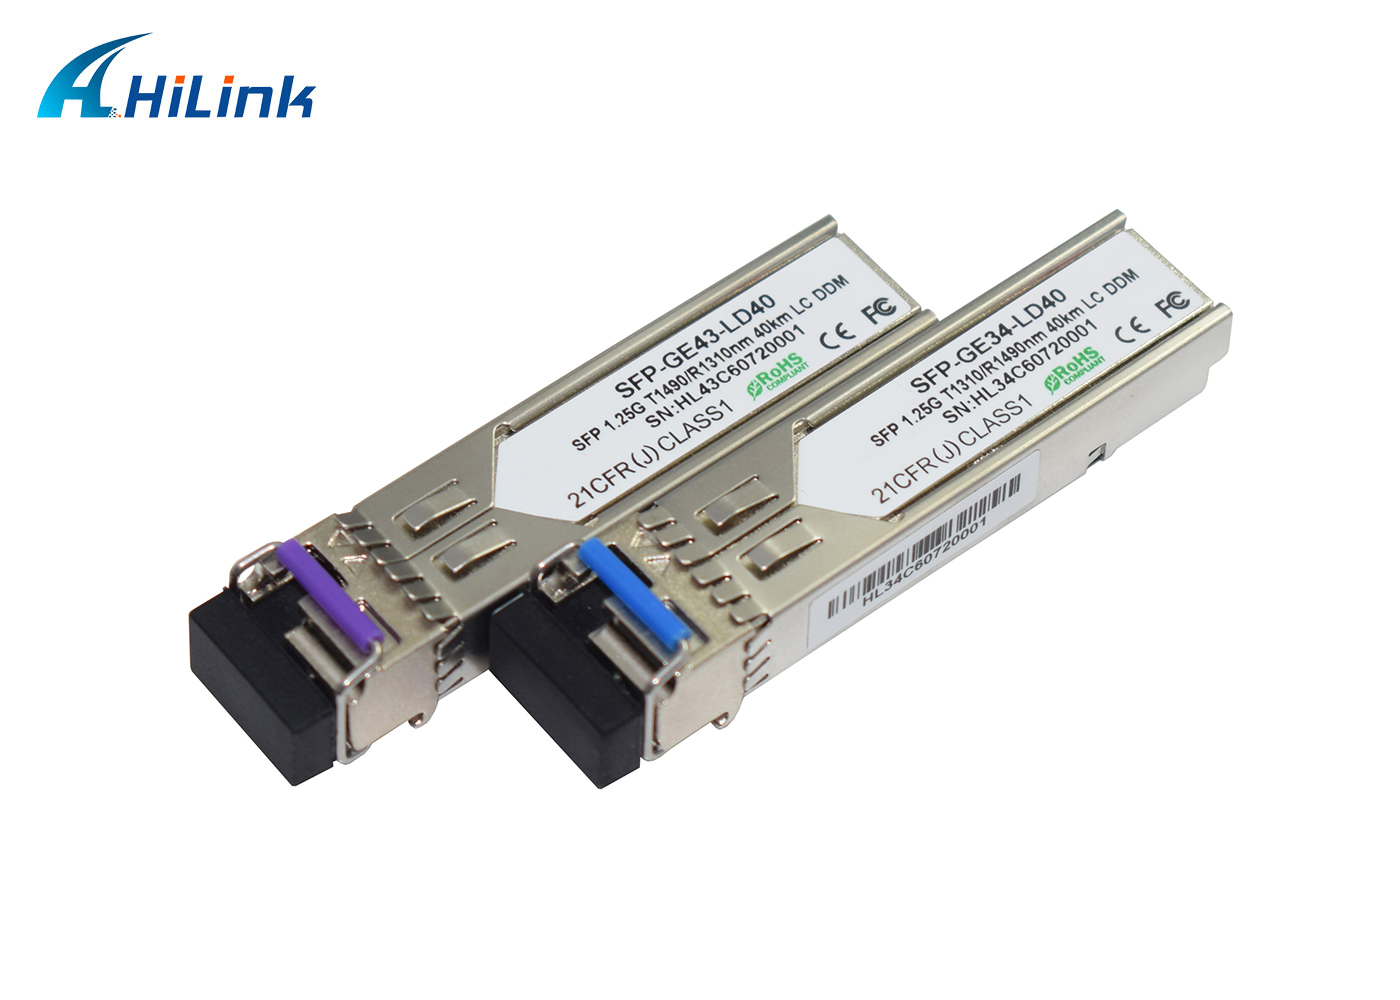 10G SFP+ optics have a smaller footprint than XFP modules, which also enables higher port density.